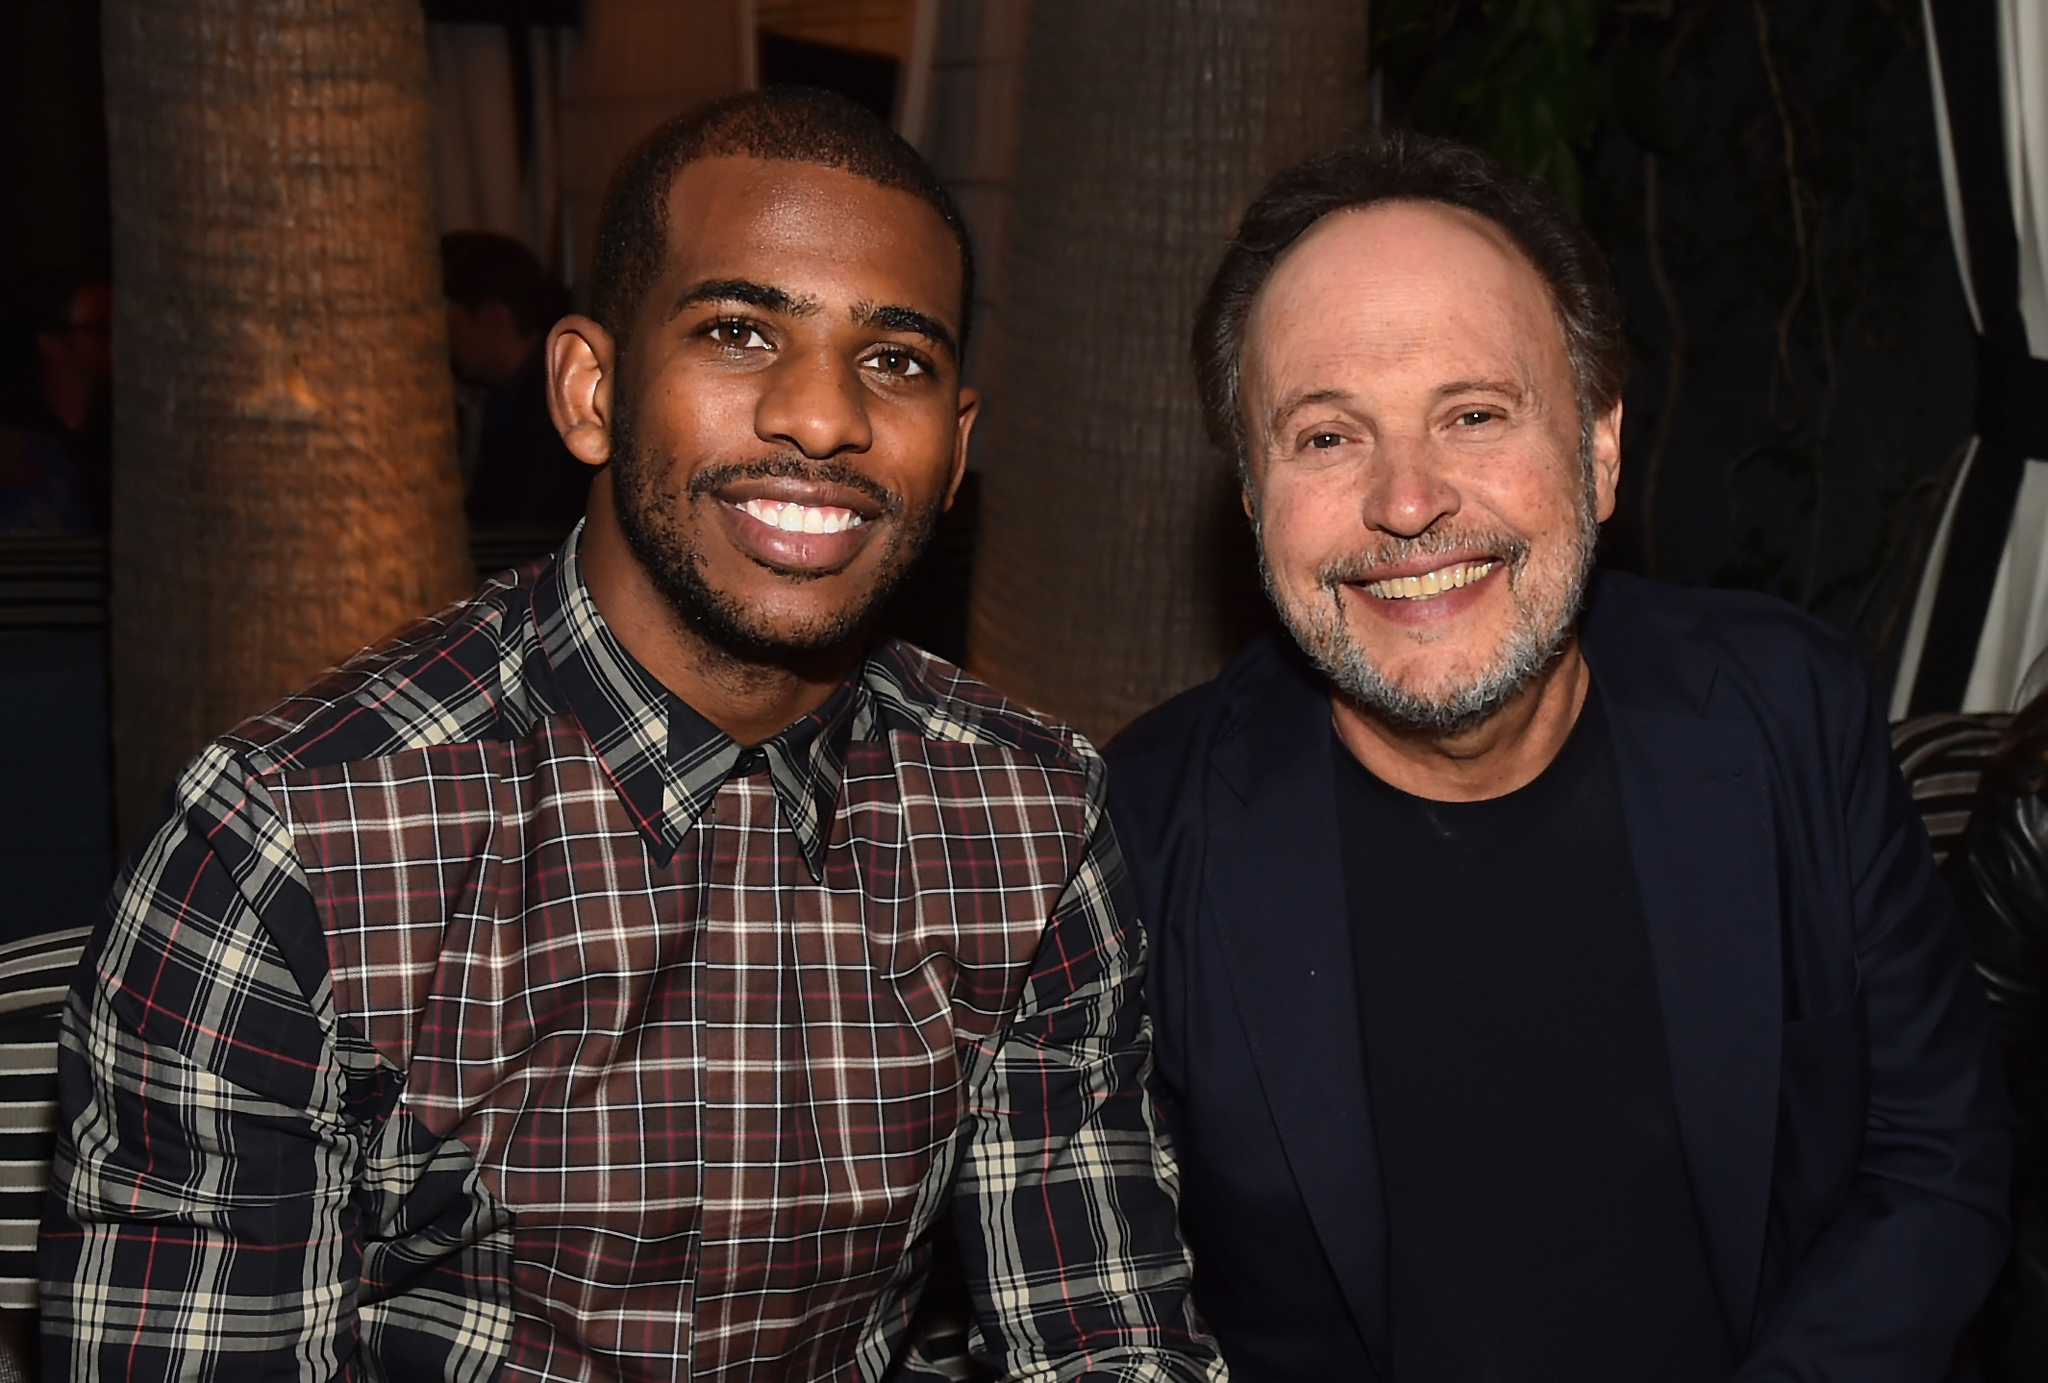 Billy Crystal and Chris Paul at event of The Comedians (2015)